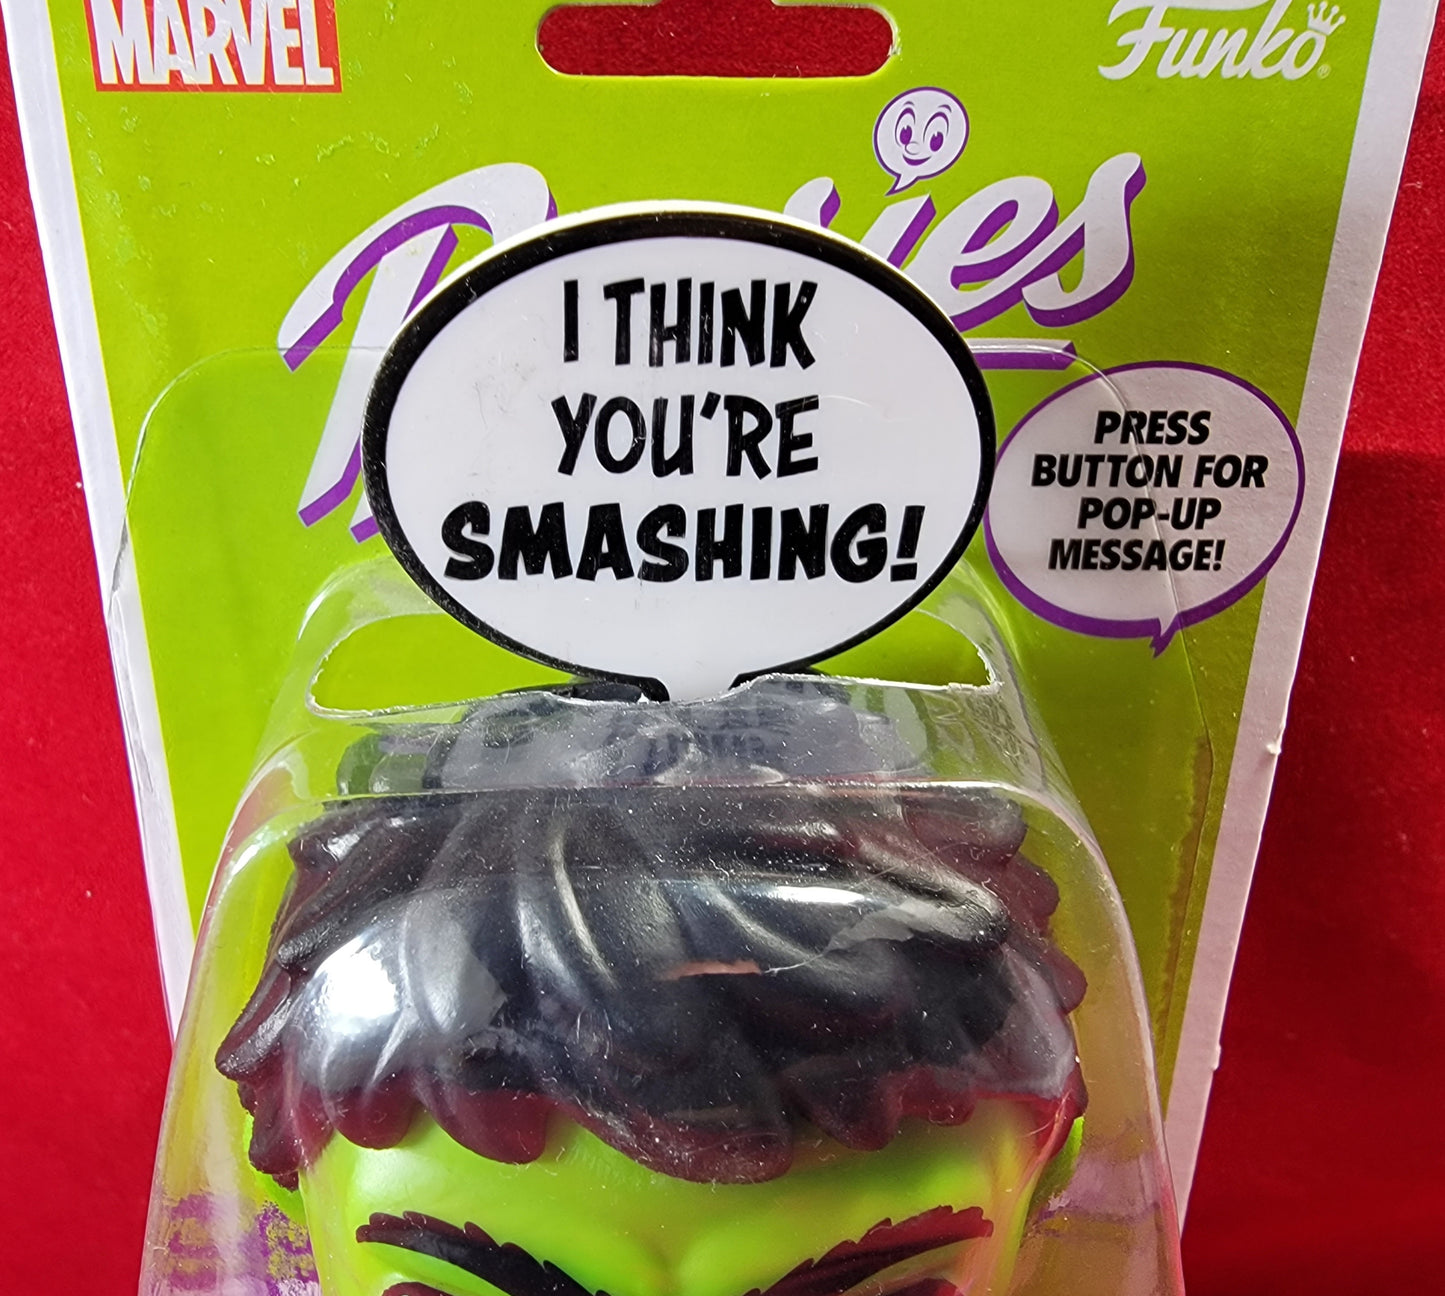 Hulk popsies 2022 (nib)
brand new Marvel popsie. popsie is 5 inches tall and 6 inches when the sign is extended. sign saids "I think you're smashing". package is sealed with only slight imperfections.